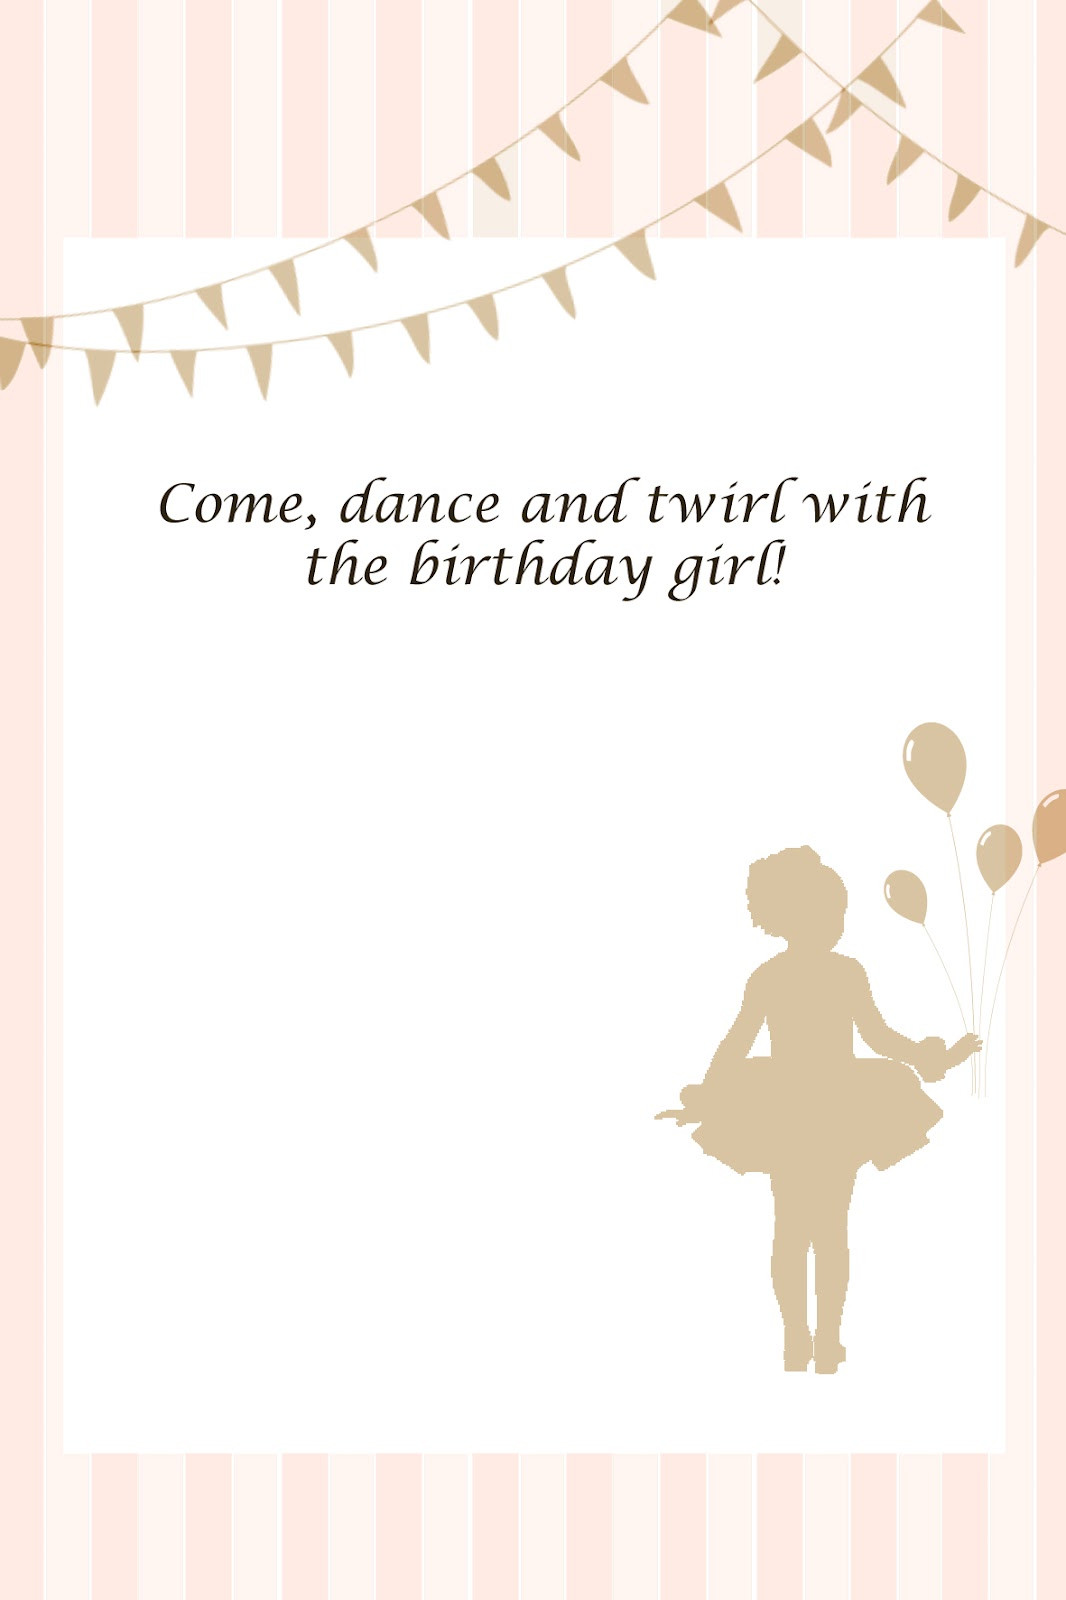 Ballerina Birthday Invitations
 Reflections Out Loud Printables from Olivia s Ballerina Party